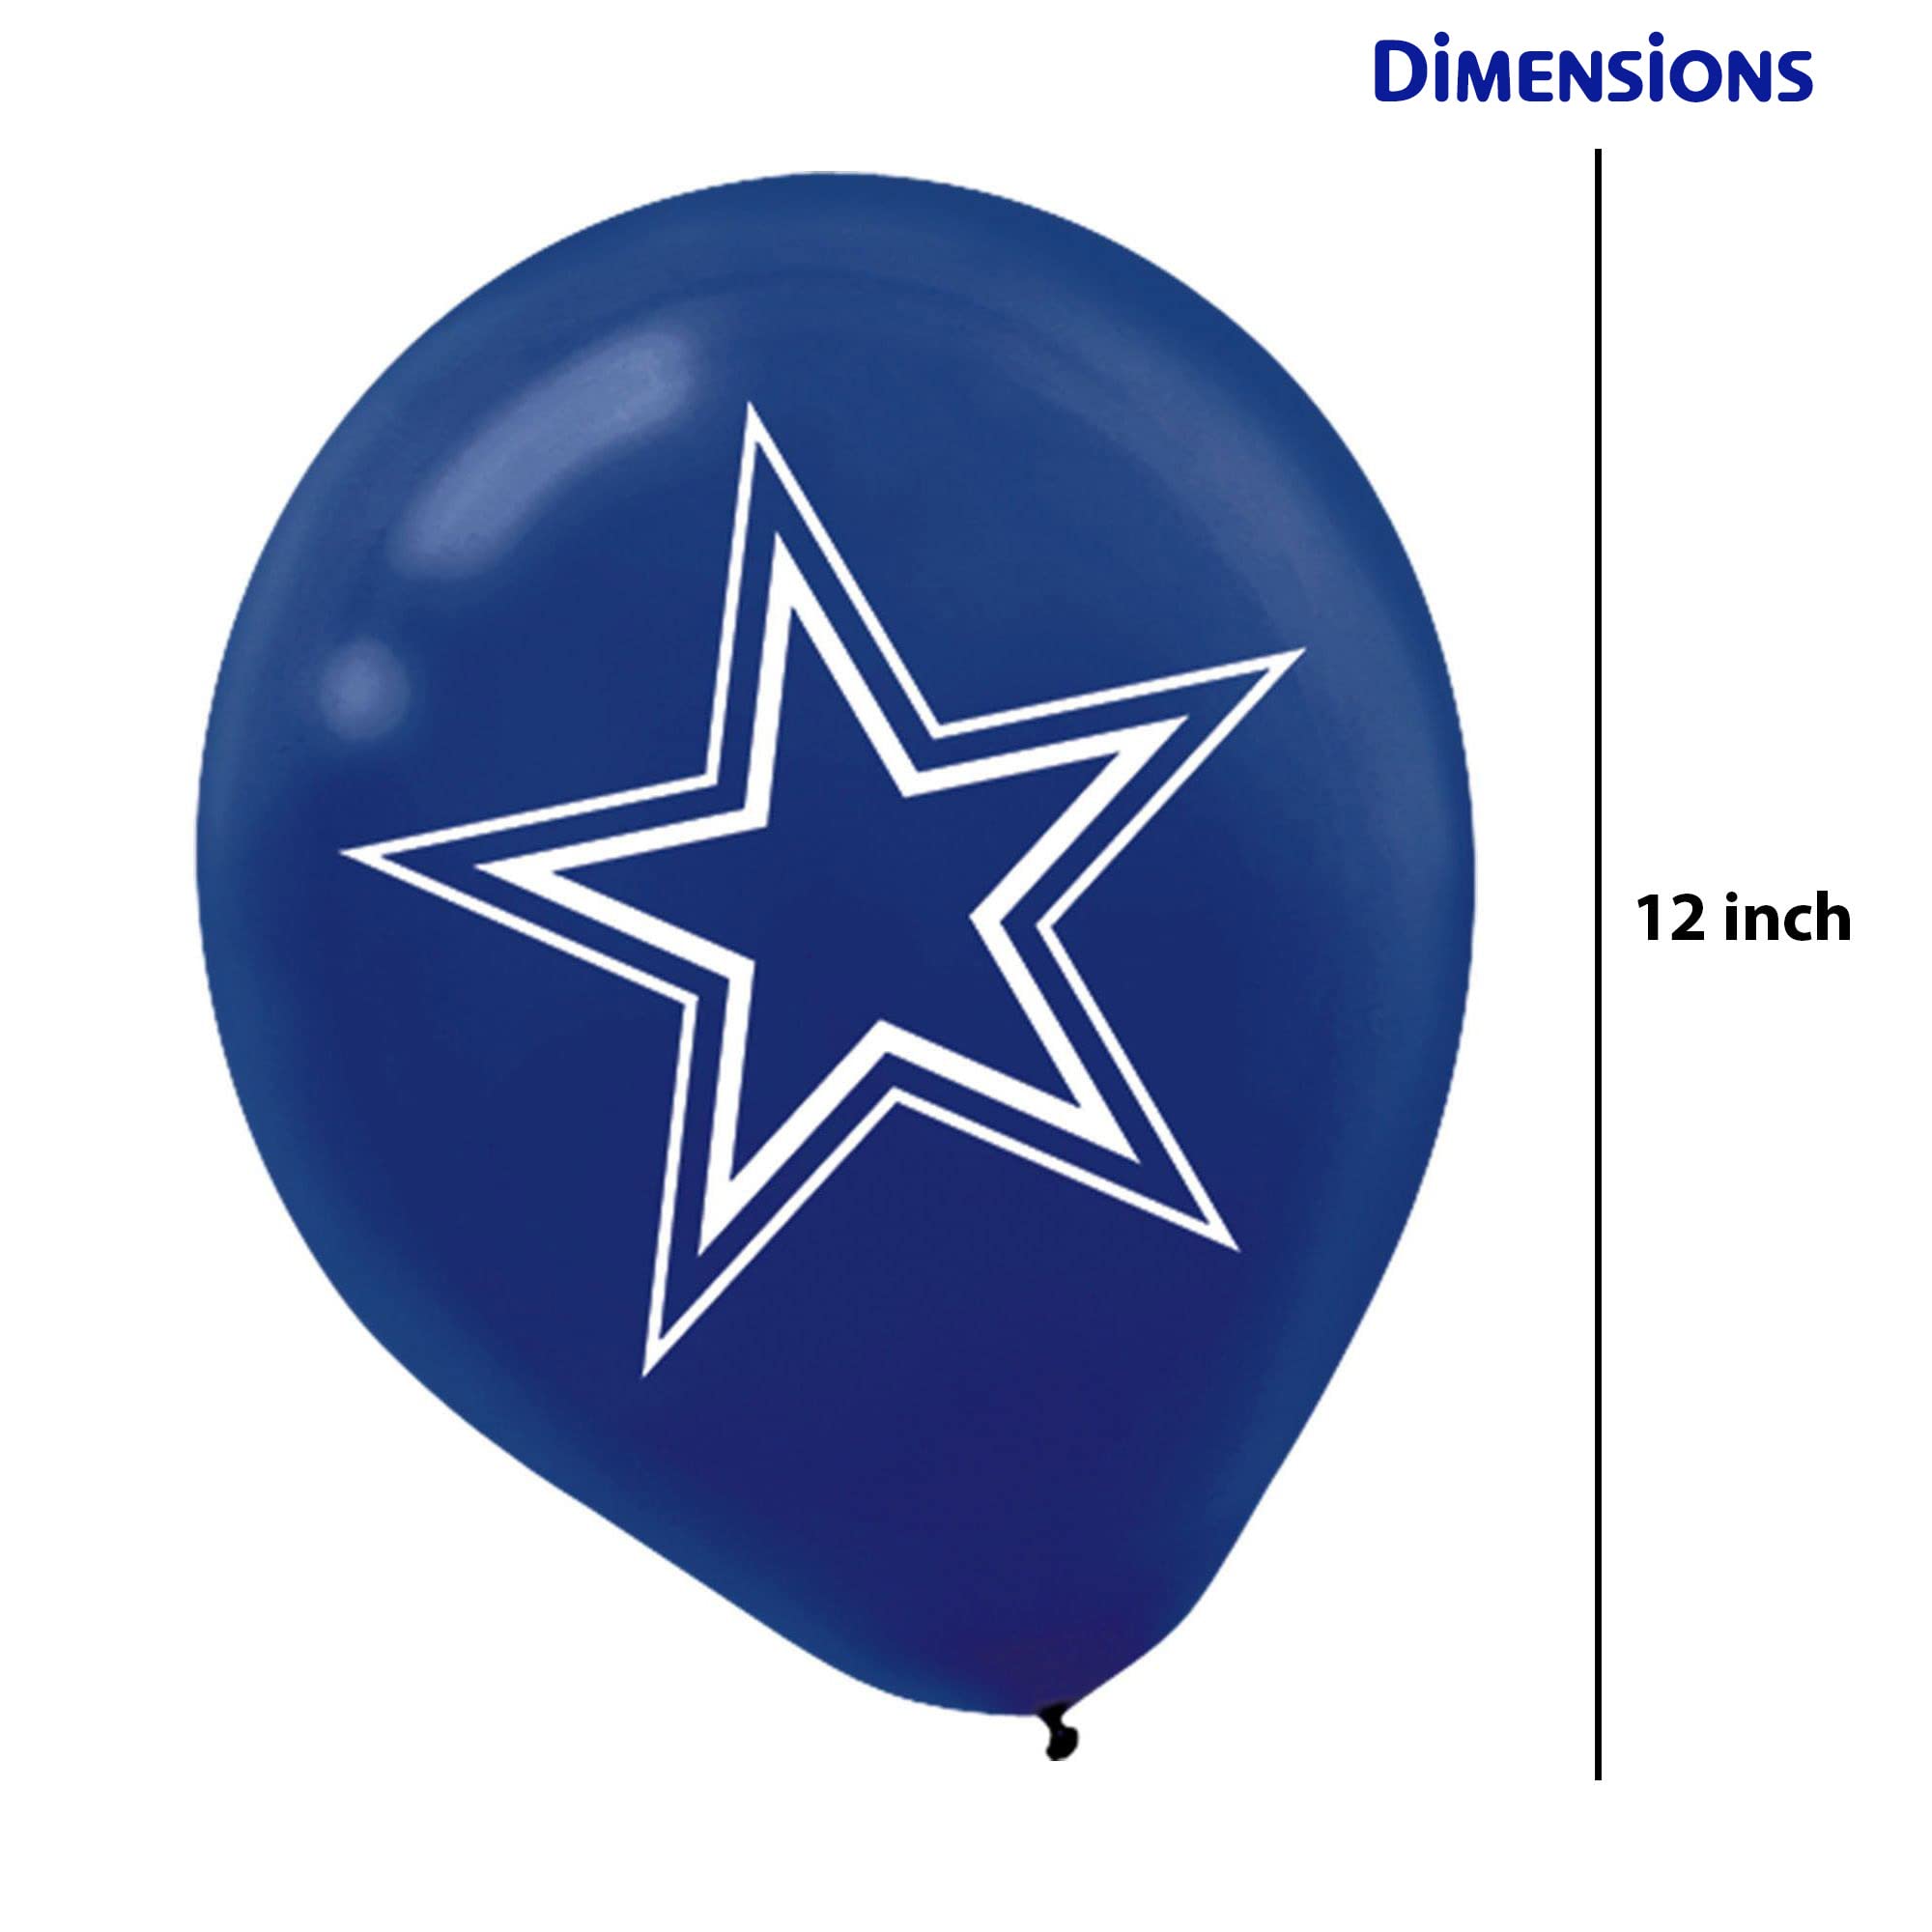 Dallas Cowboys Navy Blue Latex Balloons - 12" (6 Pack) - Unique, Durable & Eye-catching - Perfect For Game Day Parties & Decorations